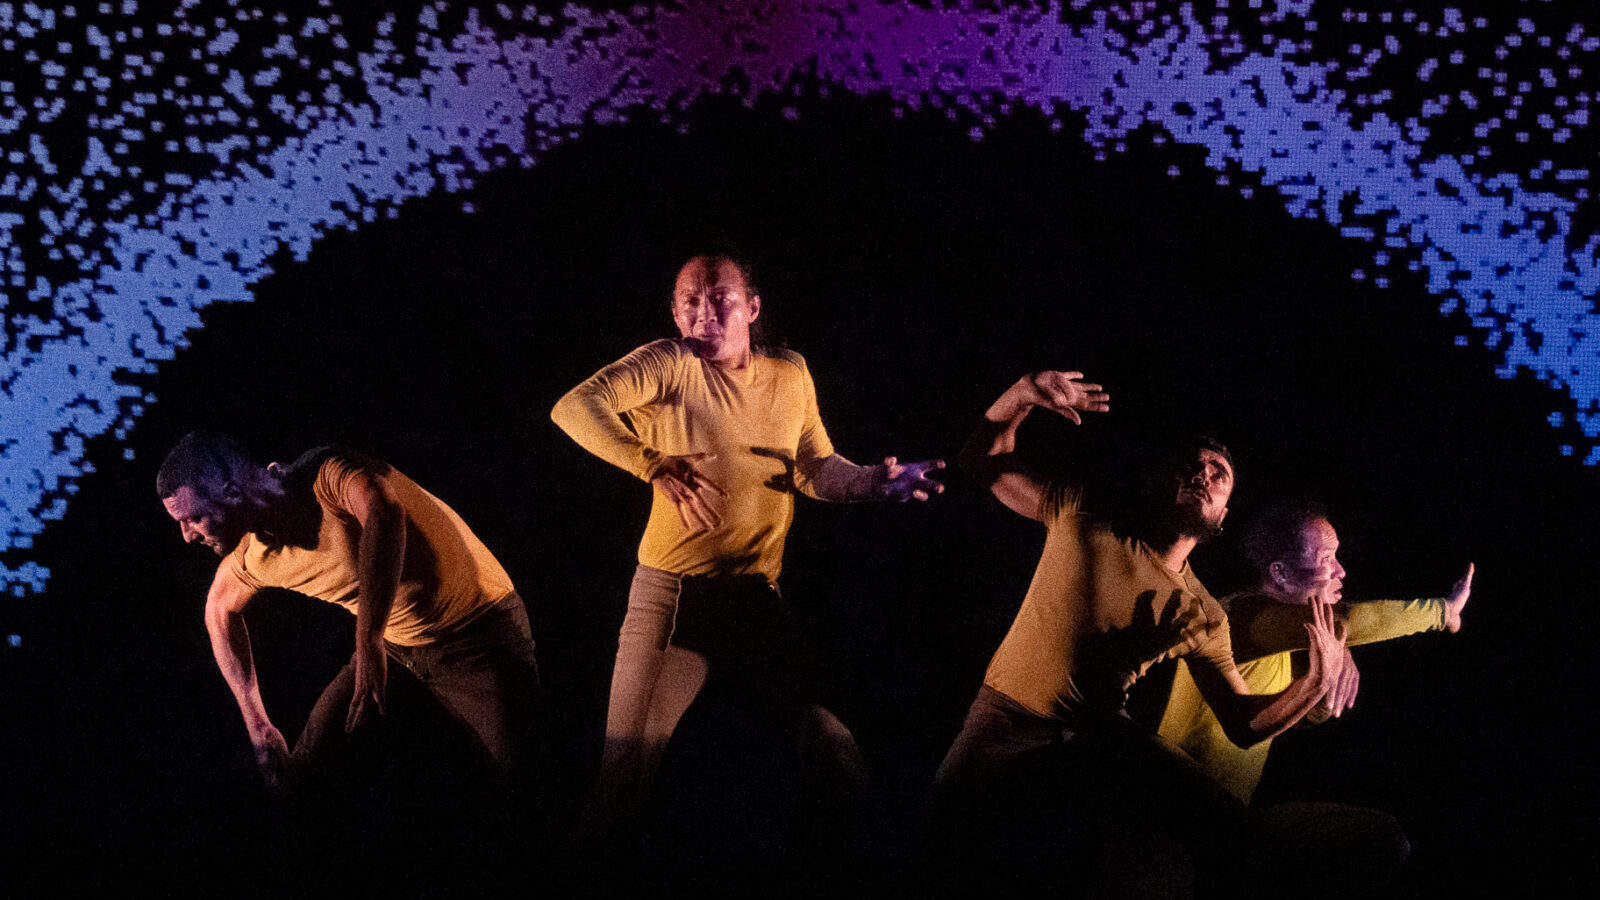 Dancers in Compagnie Käfig perform with lights in digital projections in in 'Pixel.' Press photo courtesy of Jacob's Pillow Dance Festival